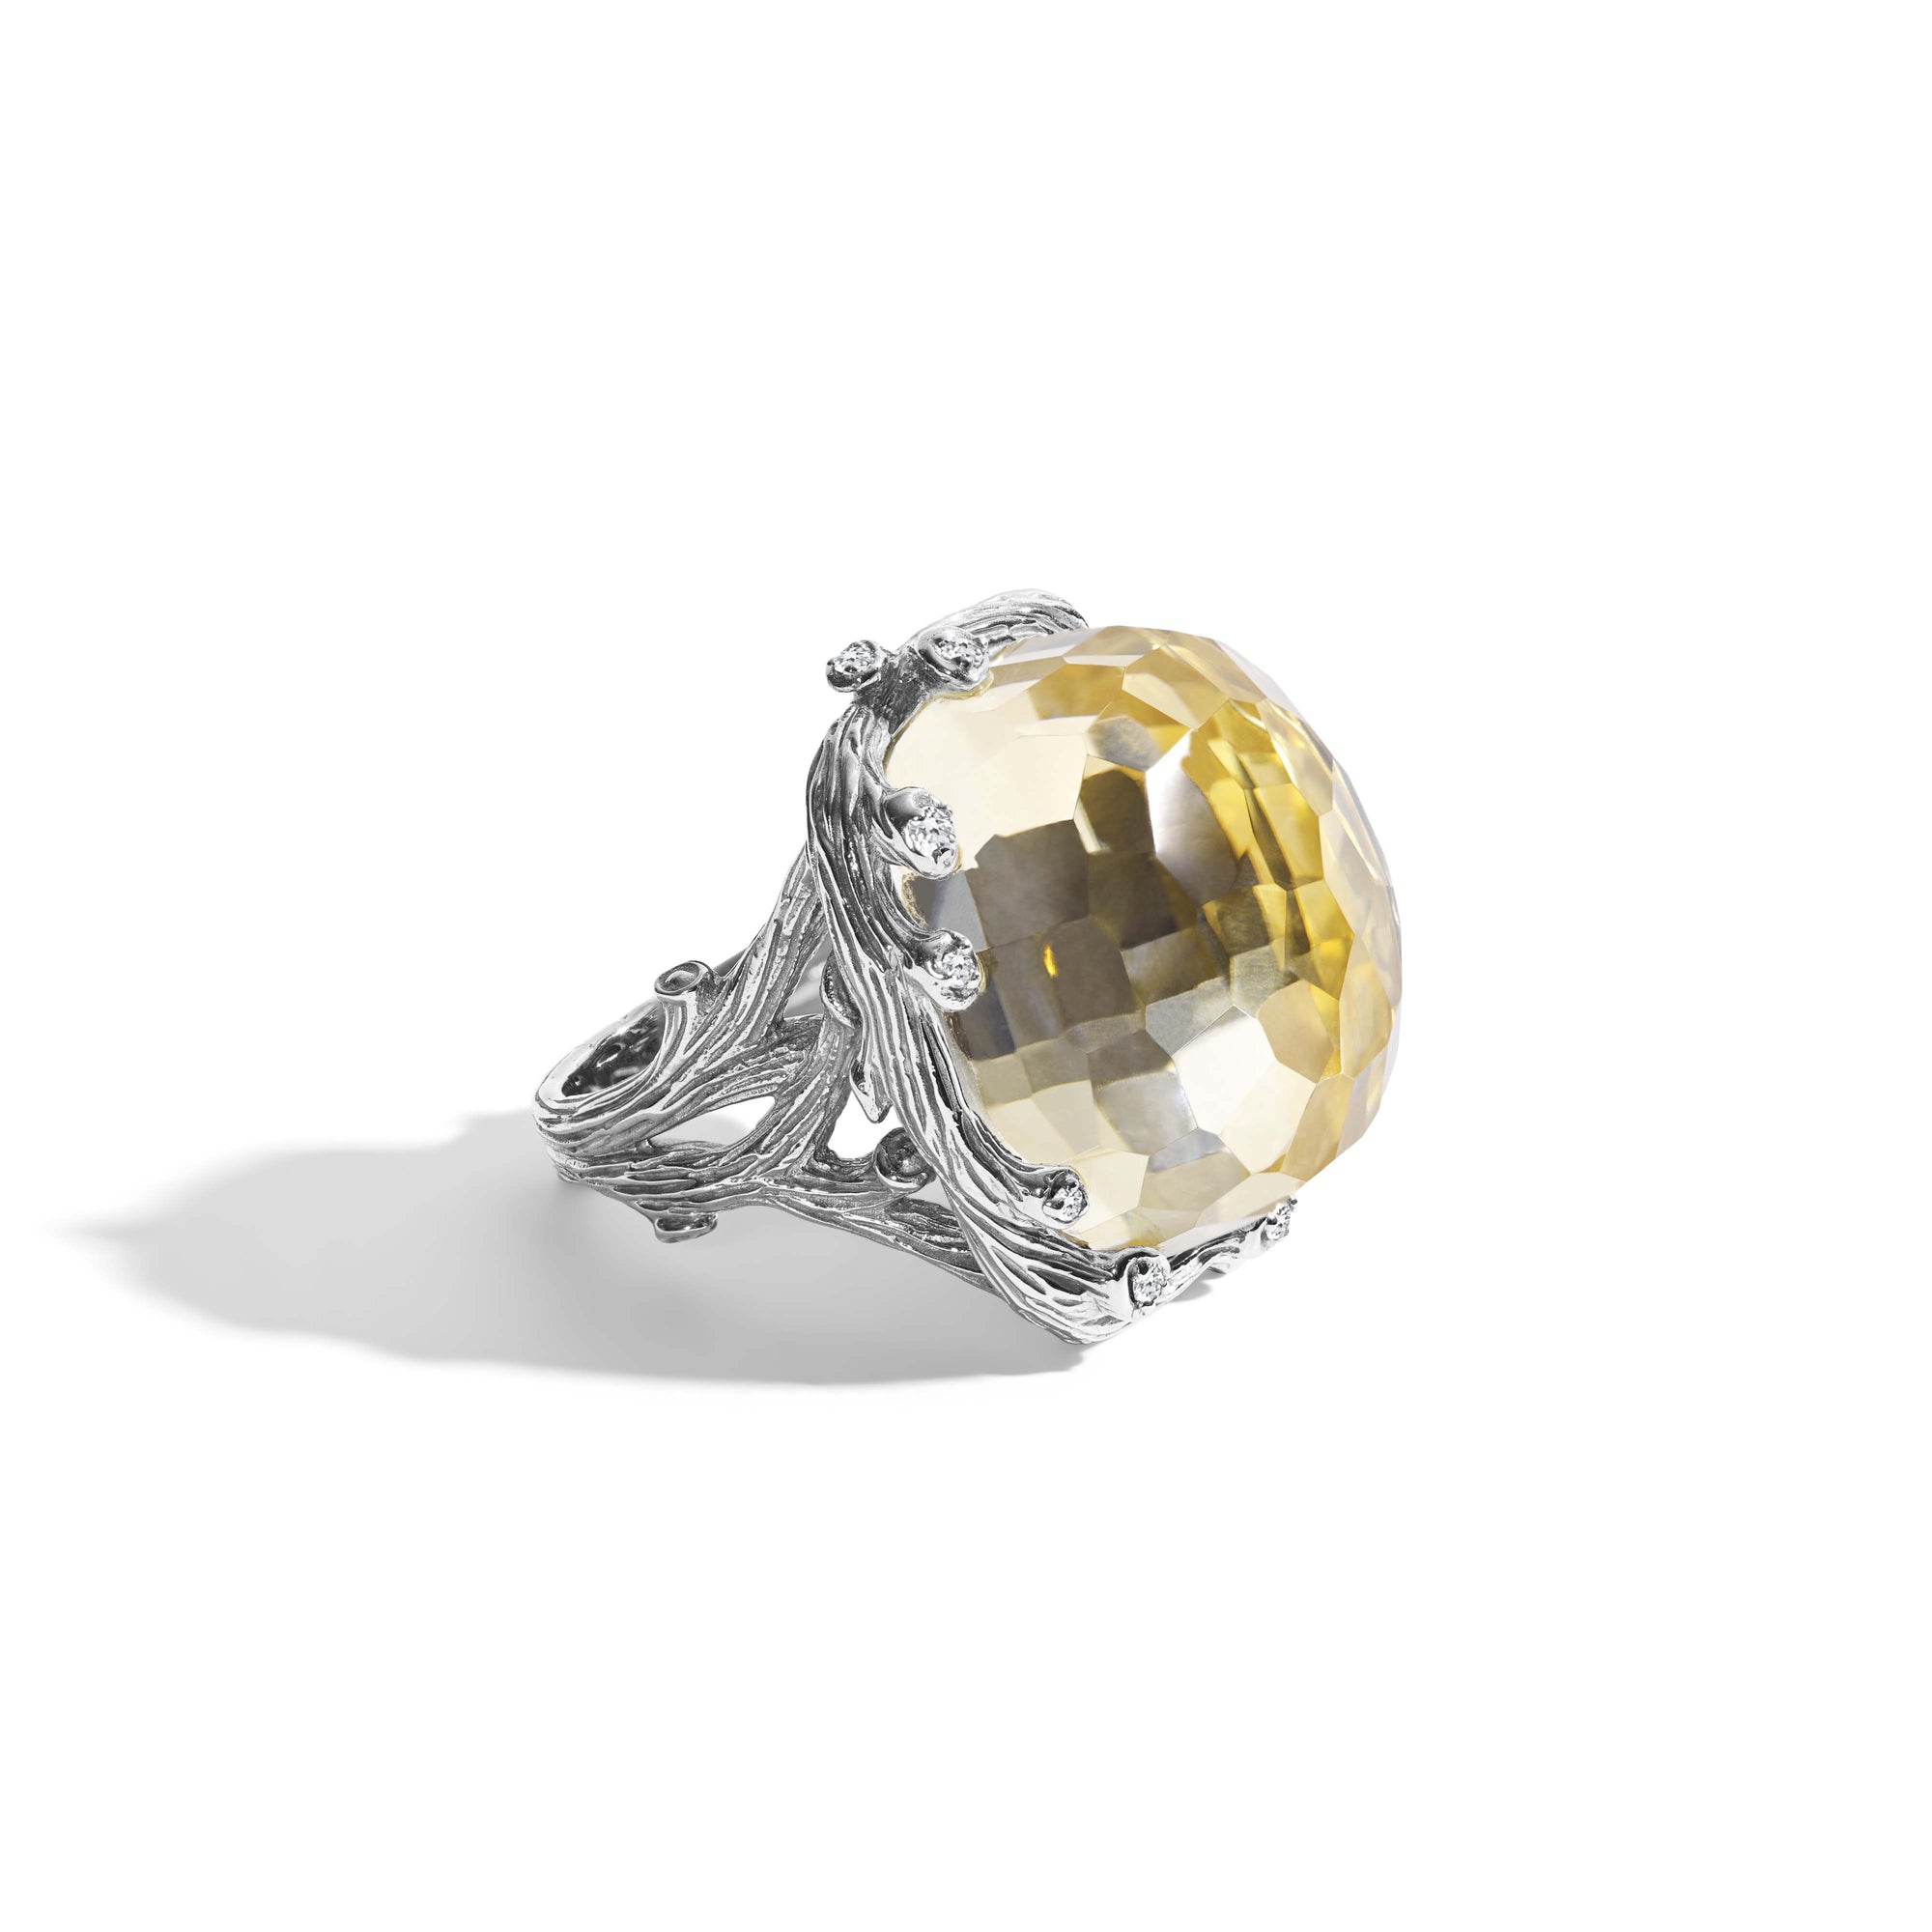 Michael Aram Enchanted Forest Ring with Gold Doublet and Diamonds